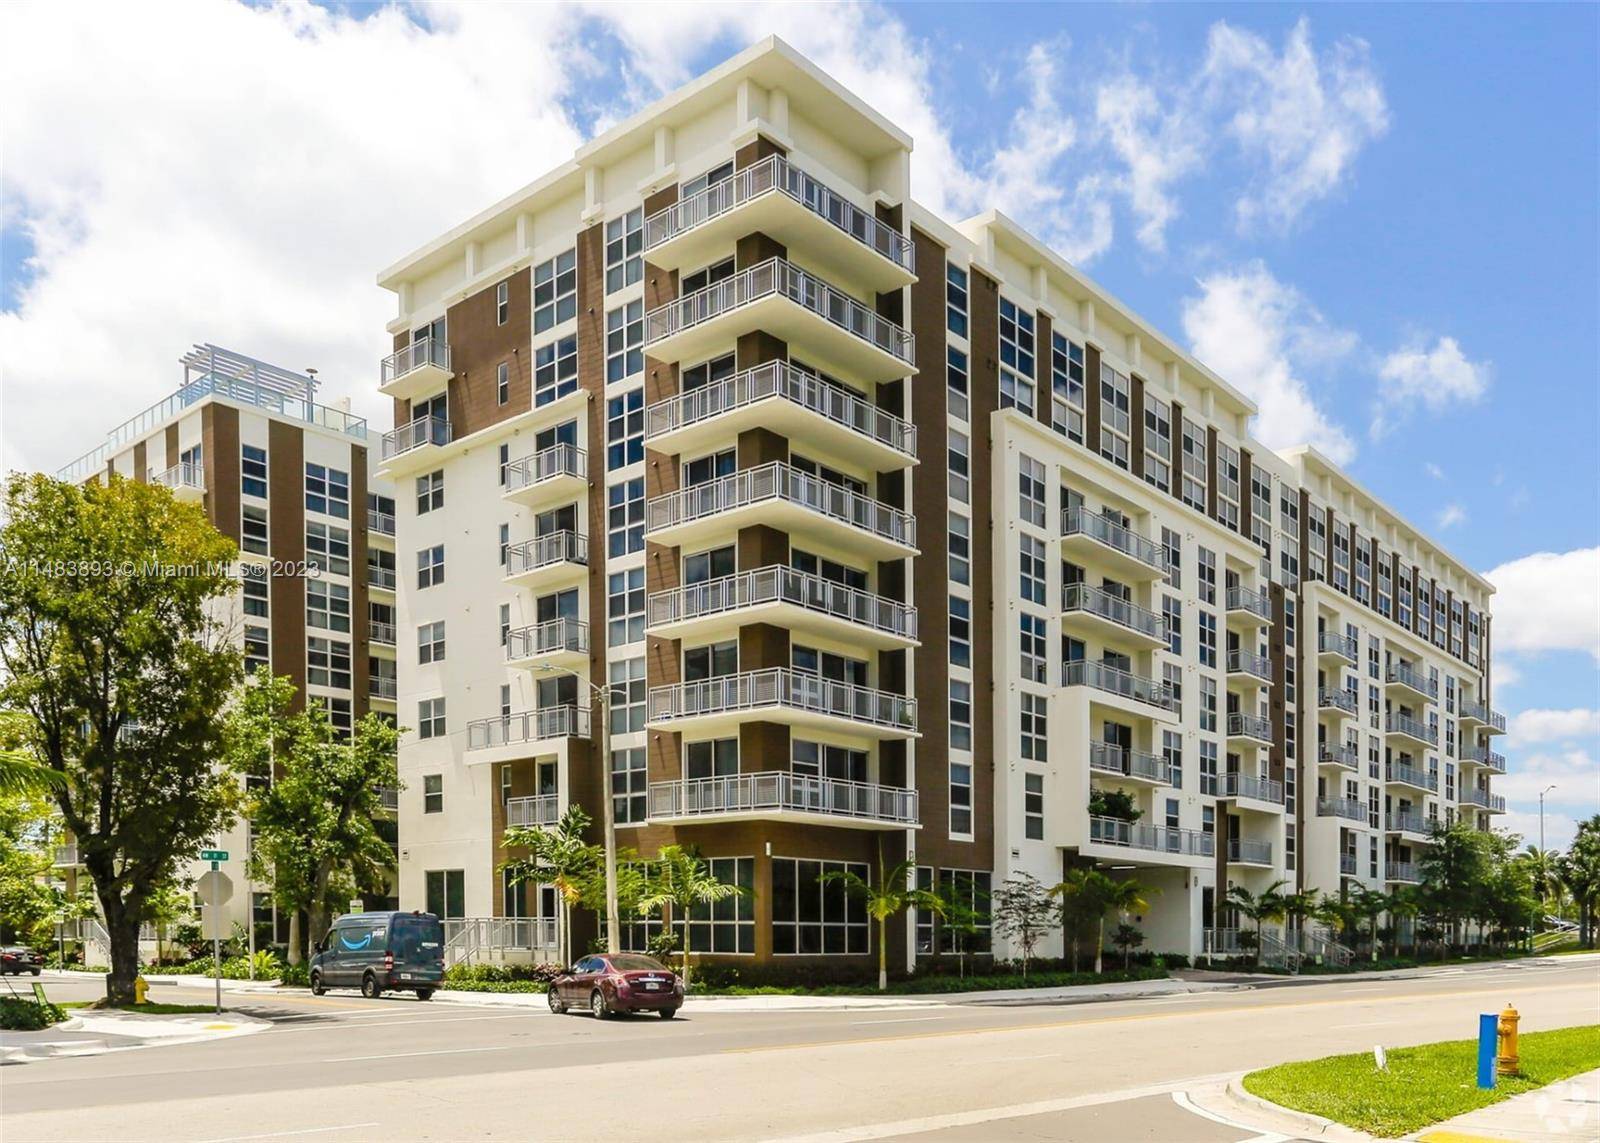 Located in the Spring Garden Historic District and overlooking the sparkling Miami River, Riverhouse at 11th is surrounded by several bustling and innovative districts, and is just minutes from Downtown ...